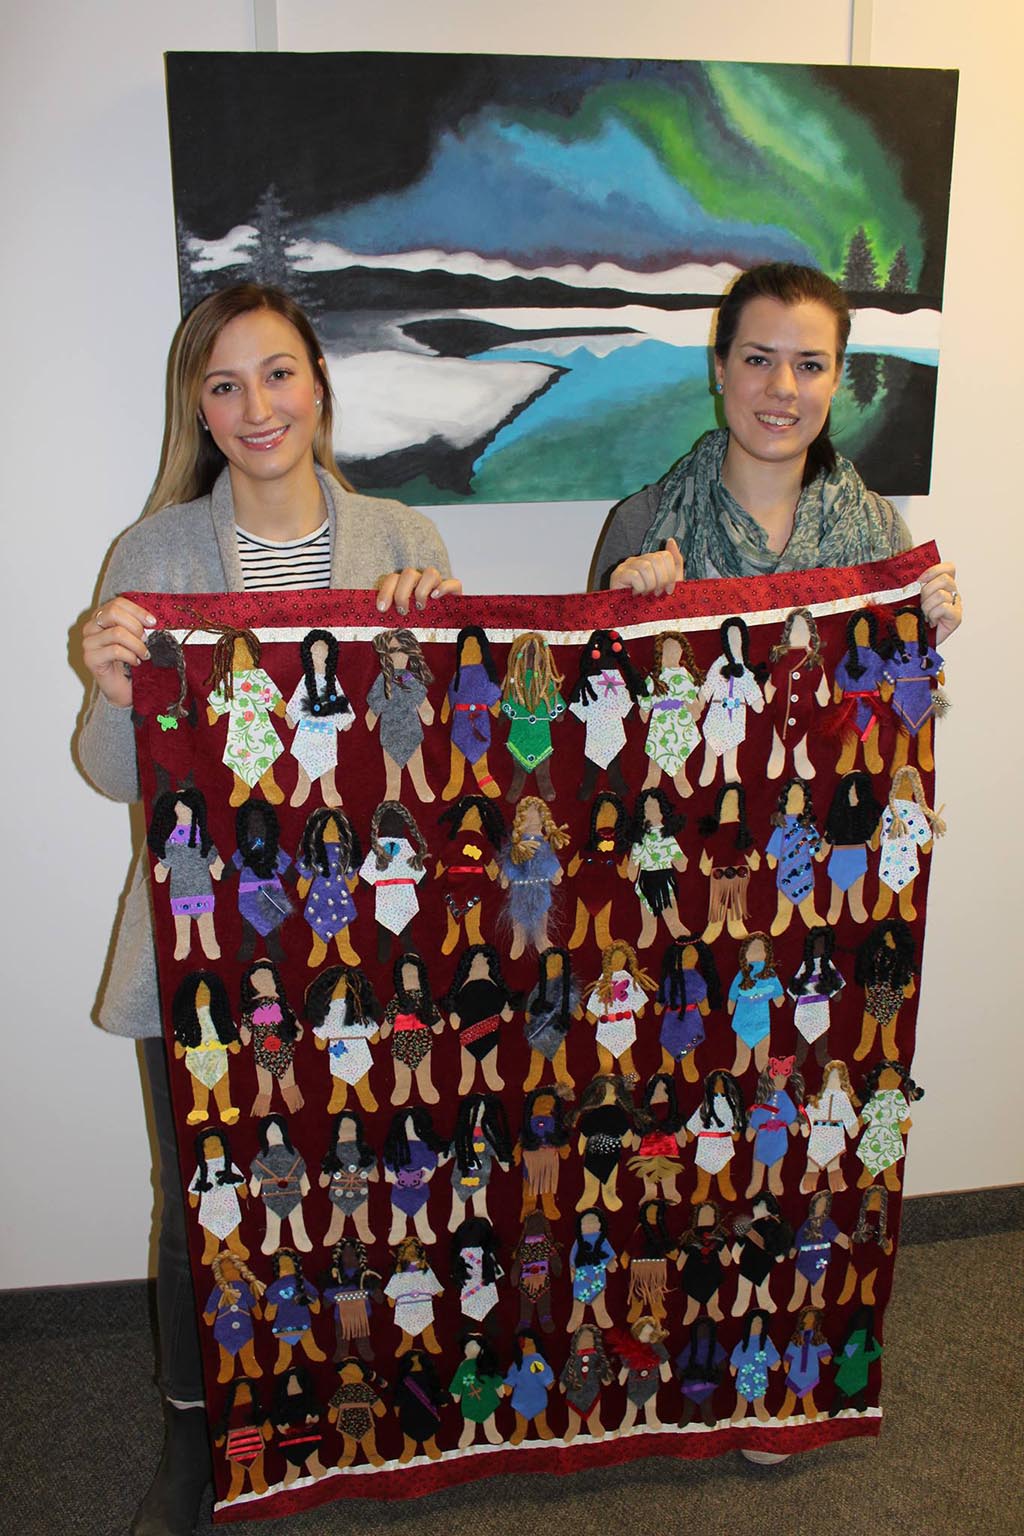 The 600 faceless dolls will be on display in the Siskinds Gallery from Feb. 13 to Feb. 17